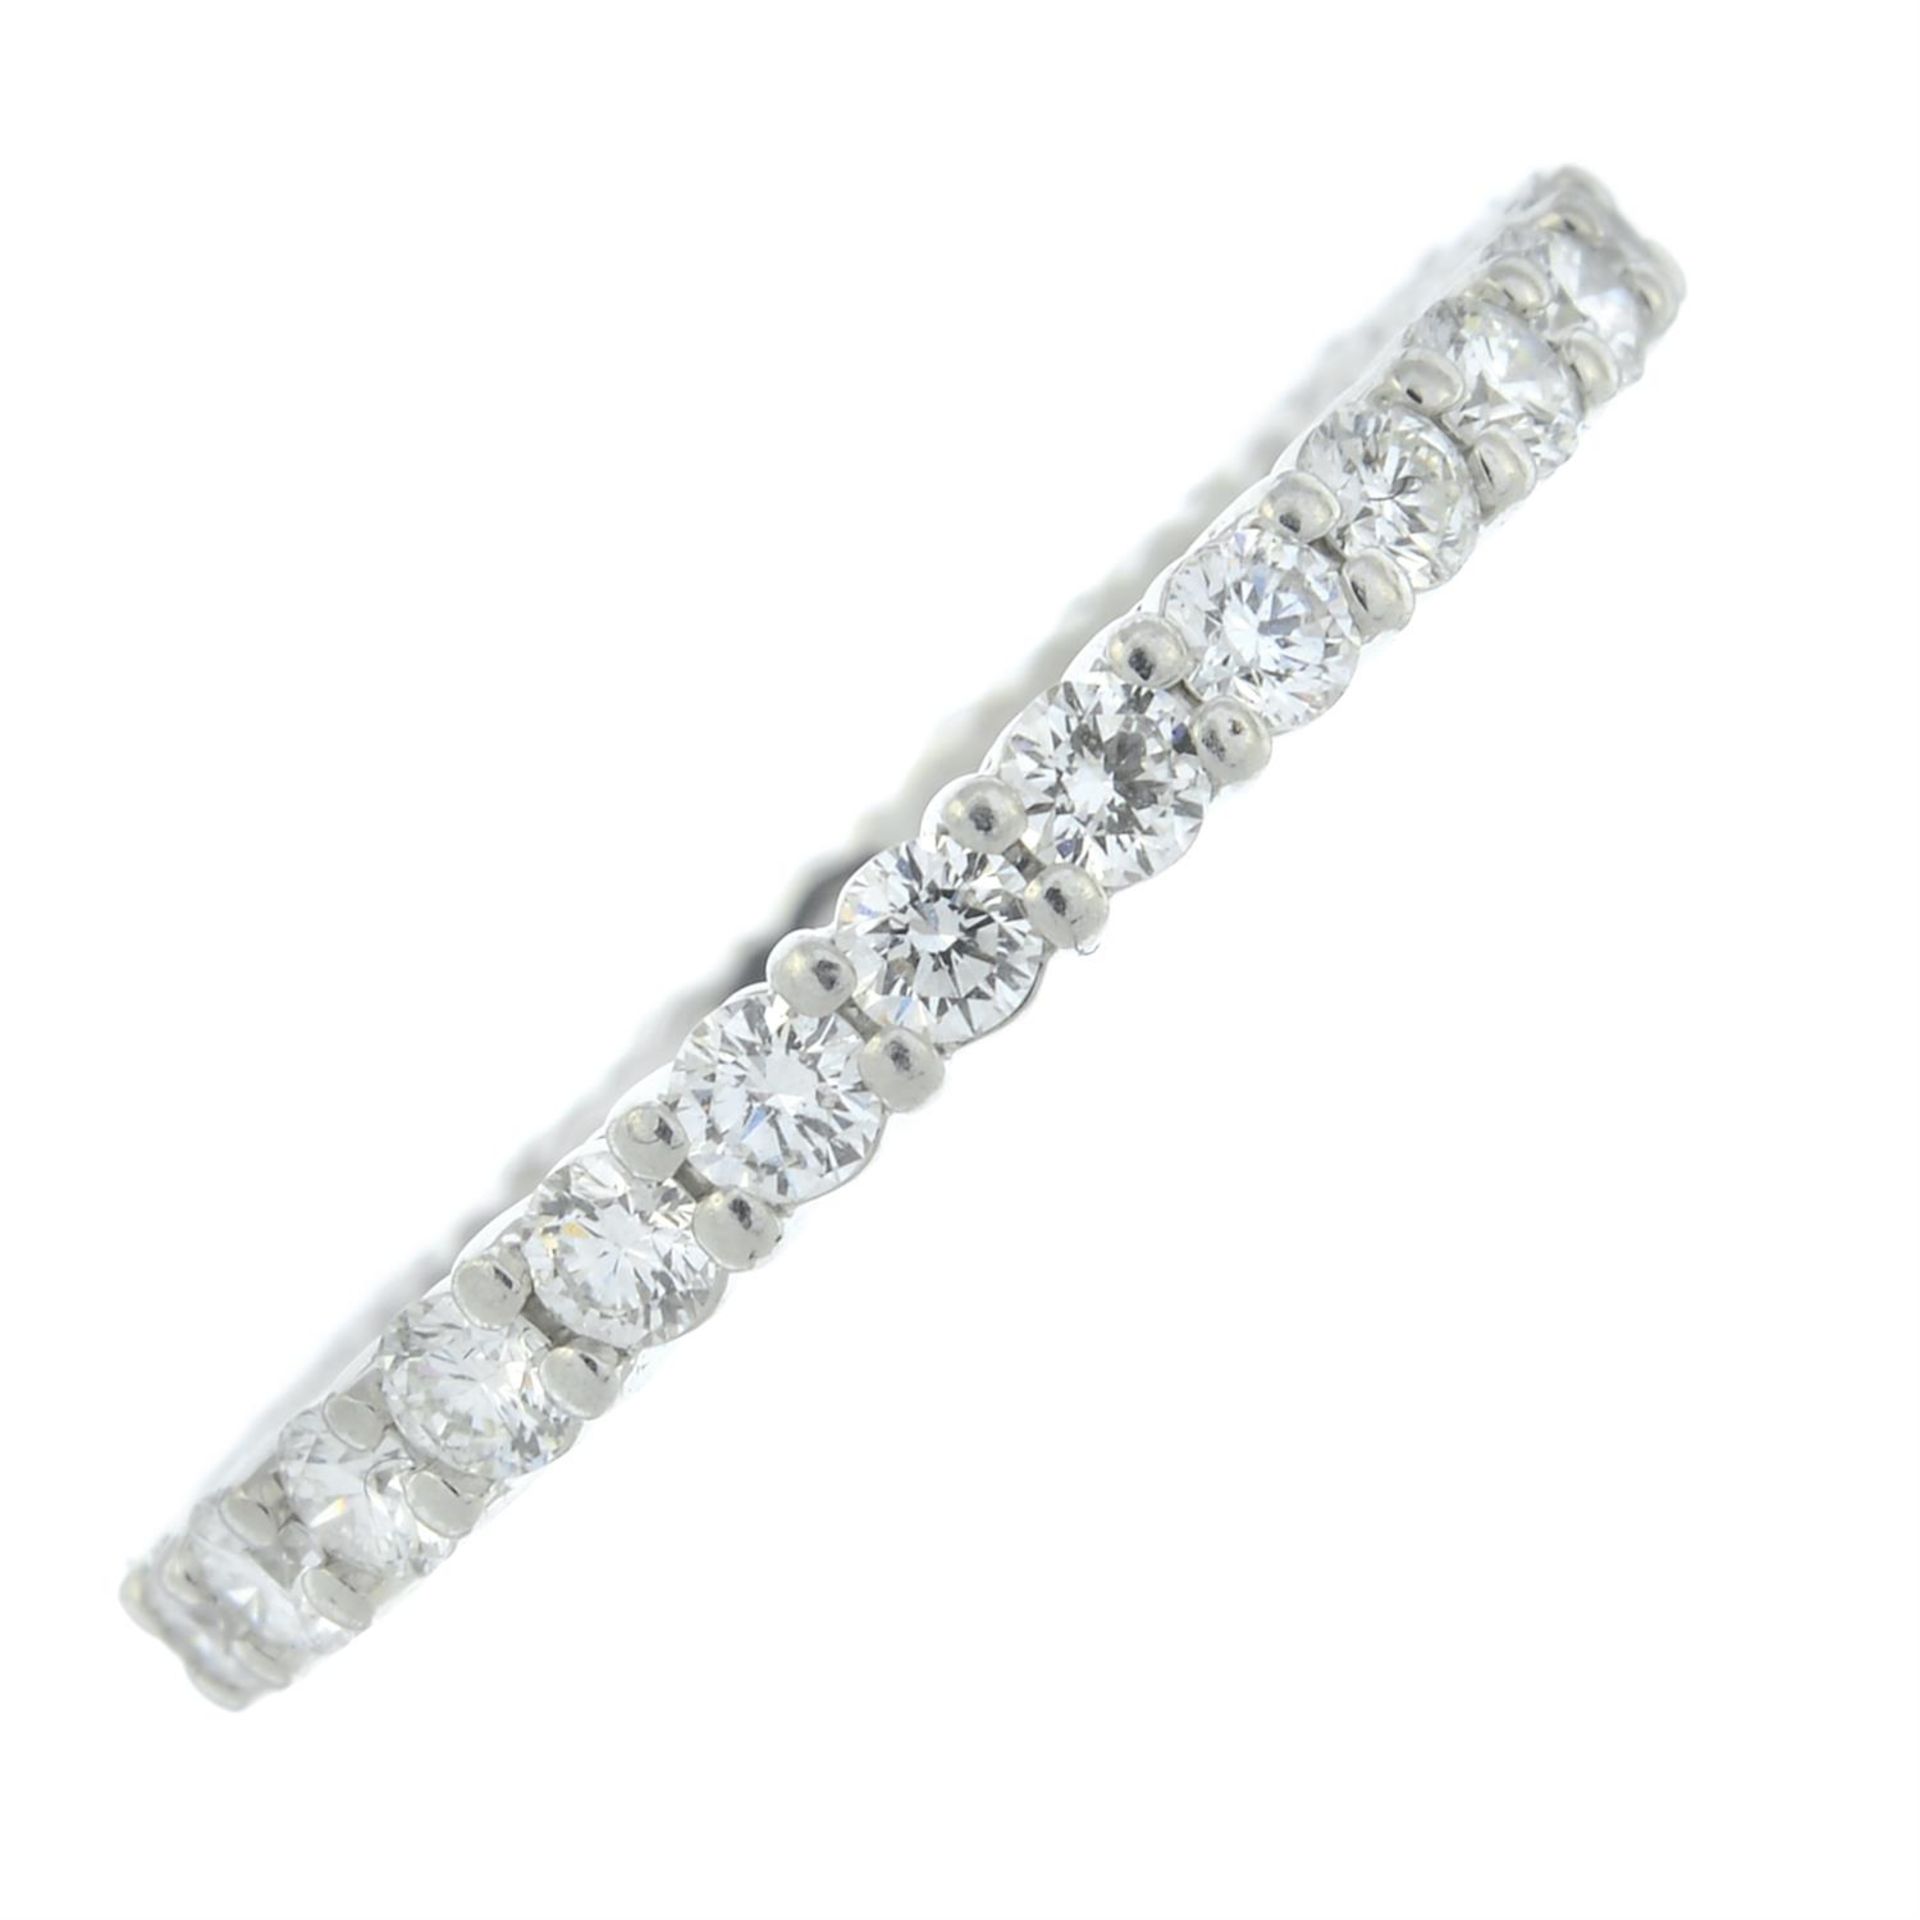 A platinum brilliant-cut diamond 'Embrace' full eternity ring, by Tiffany & Co. - Image 2 of 5